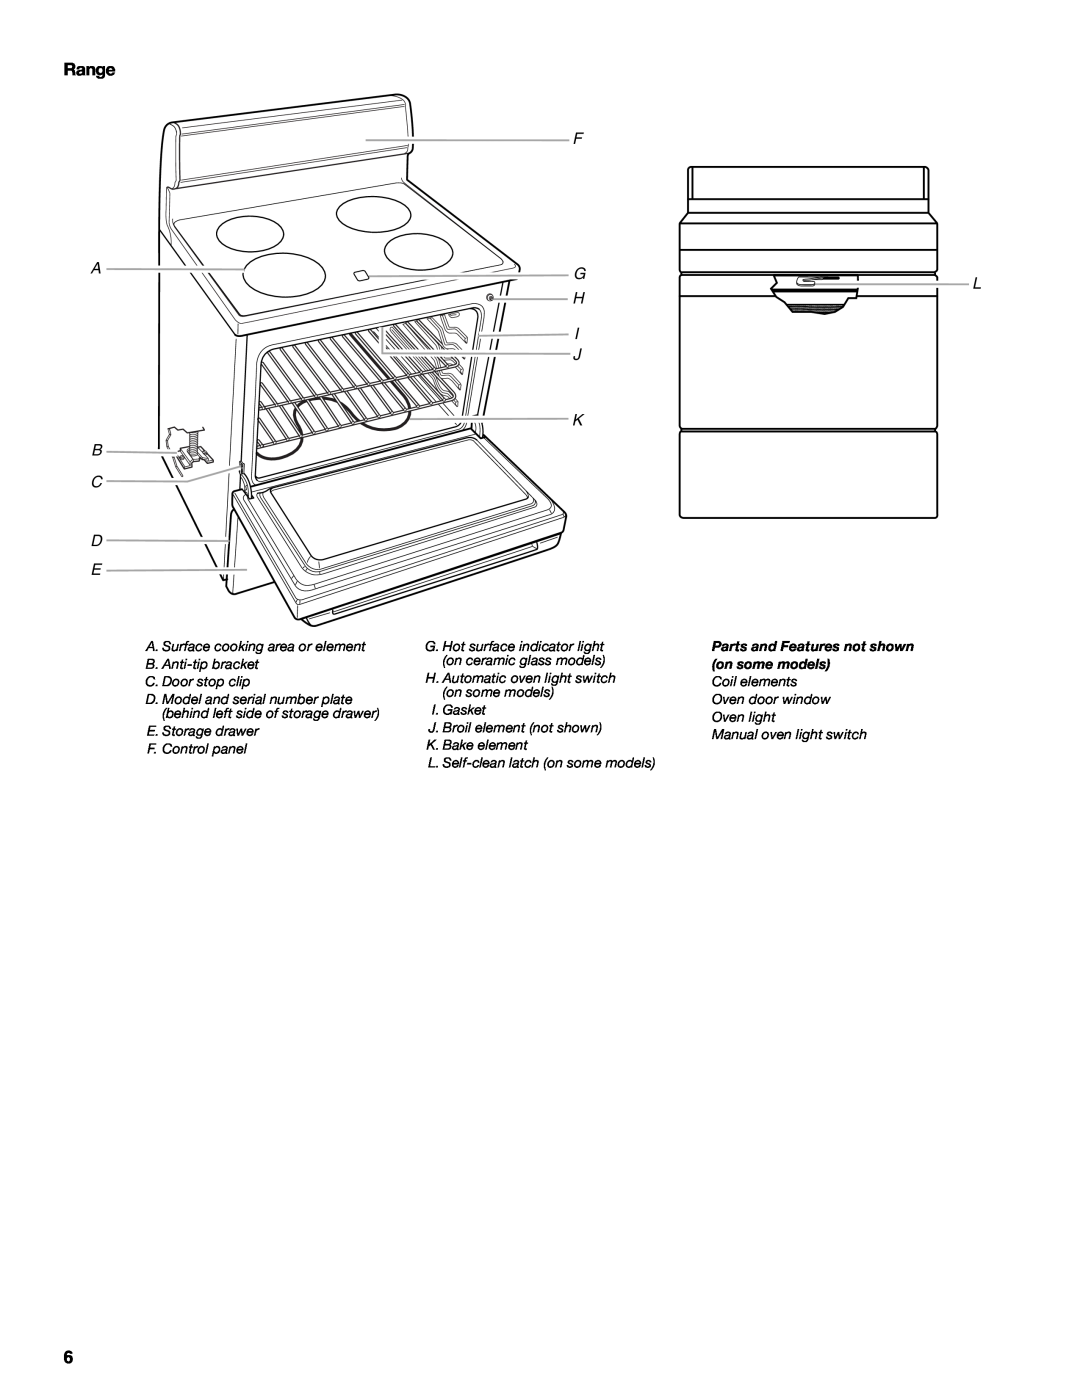 Whirlpool YIES366RS1 manual Range, F A G H I J K B C D E, Parts and Features not shown on some models 